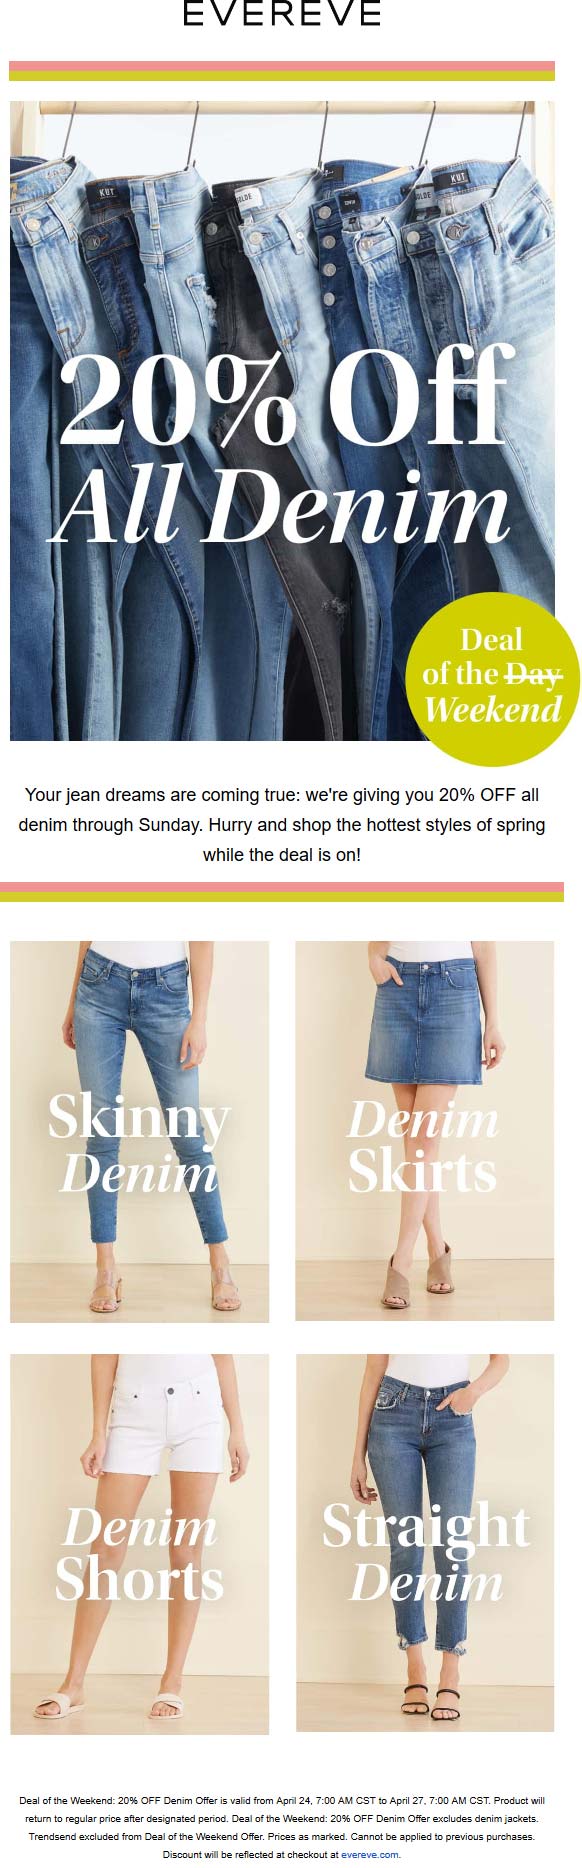 20 off all denim at Evereve (04/26) The Coupons App®